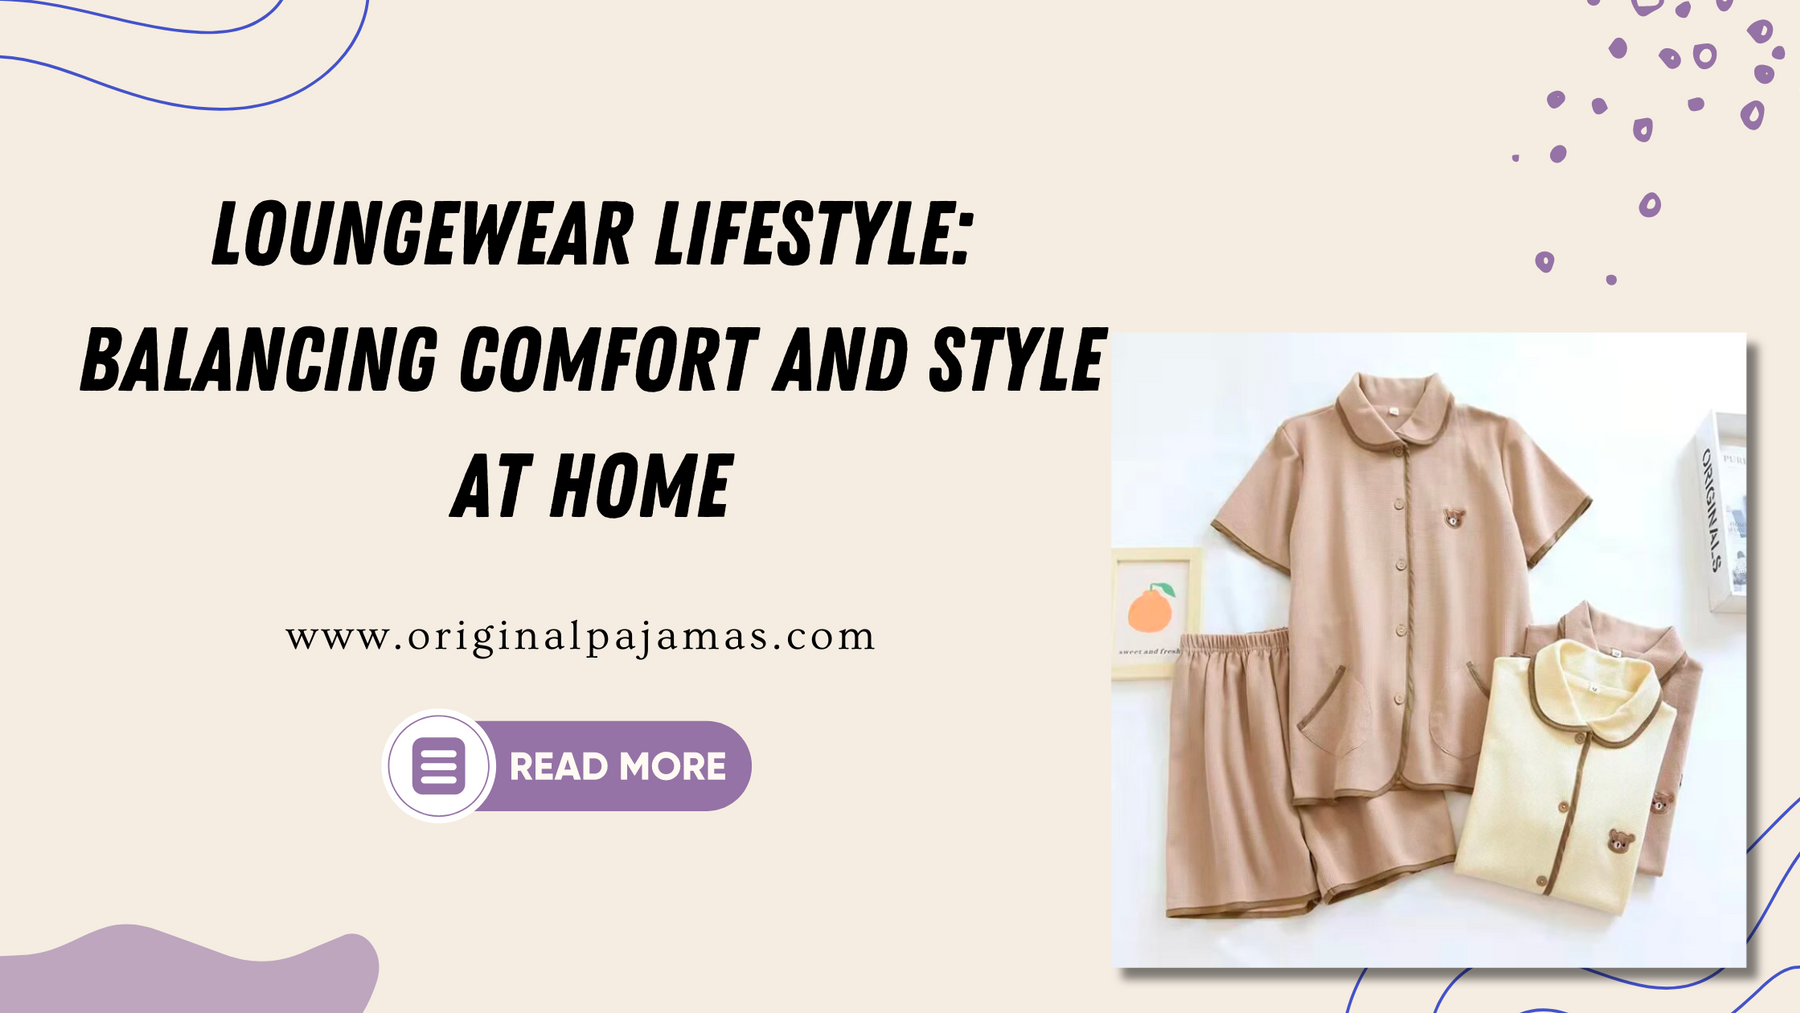 Loungewear Lifestyle: Balancing Comfort and Style at Home